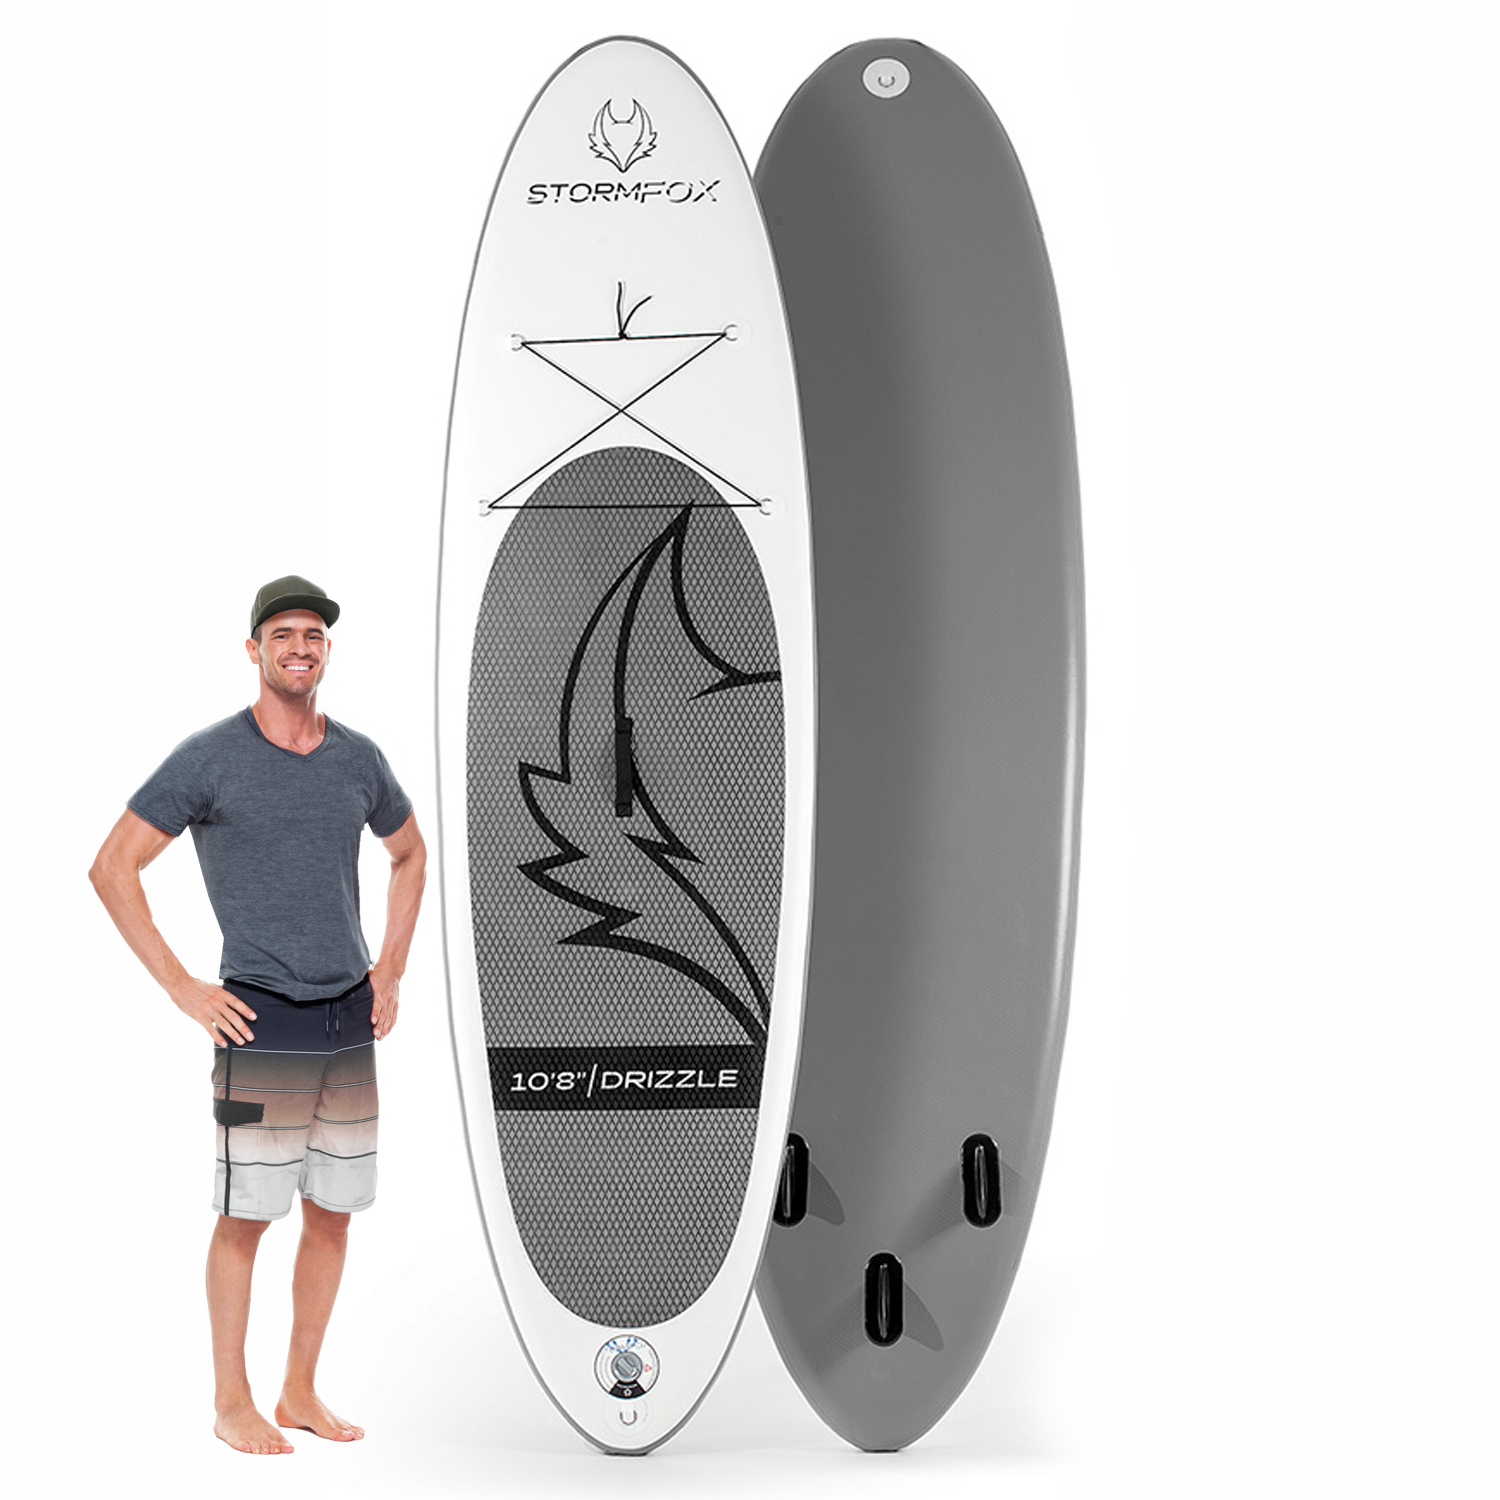 Drizzle Stand Up Paddle Board Kit - 10'8